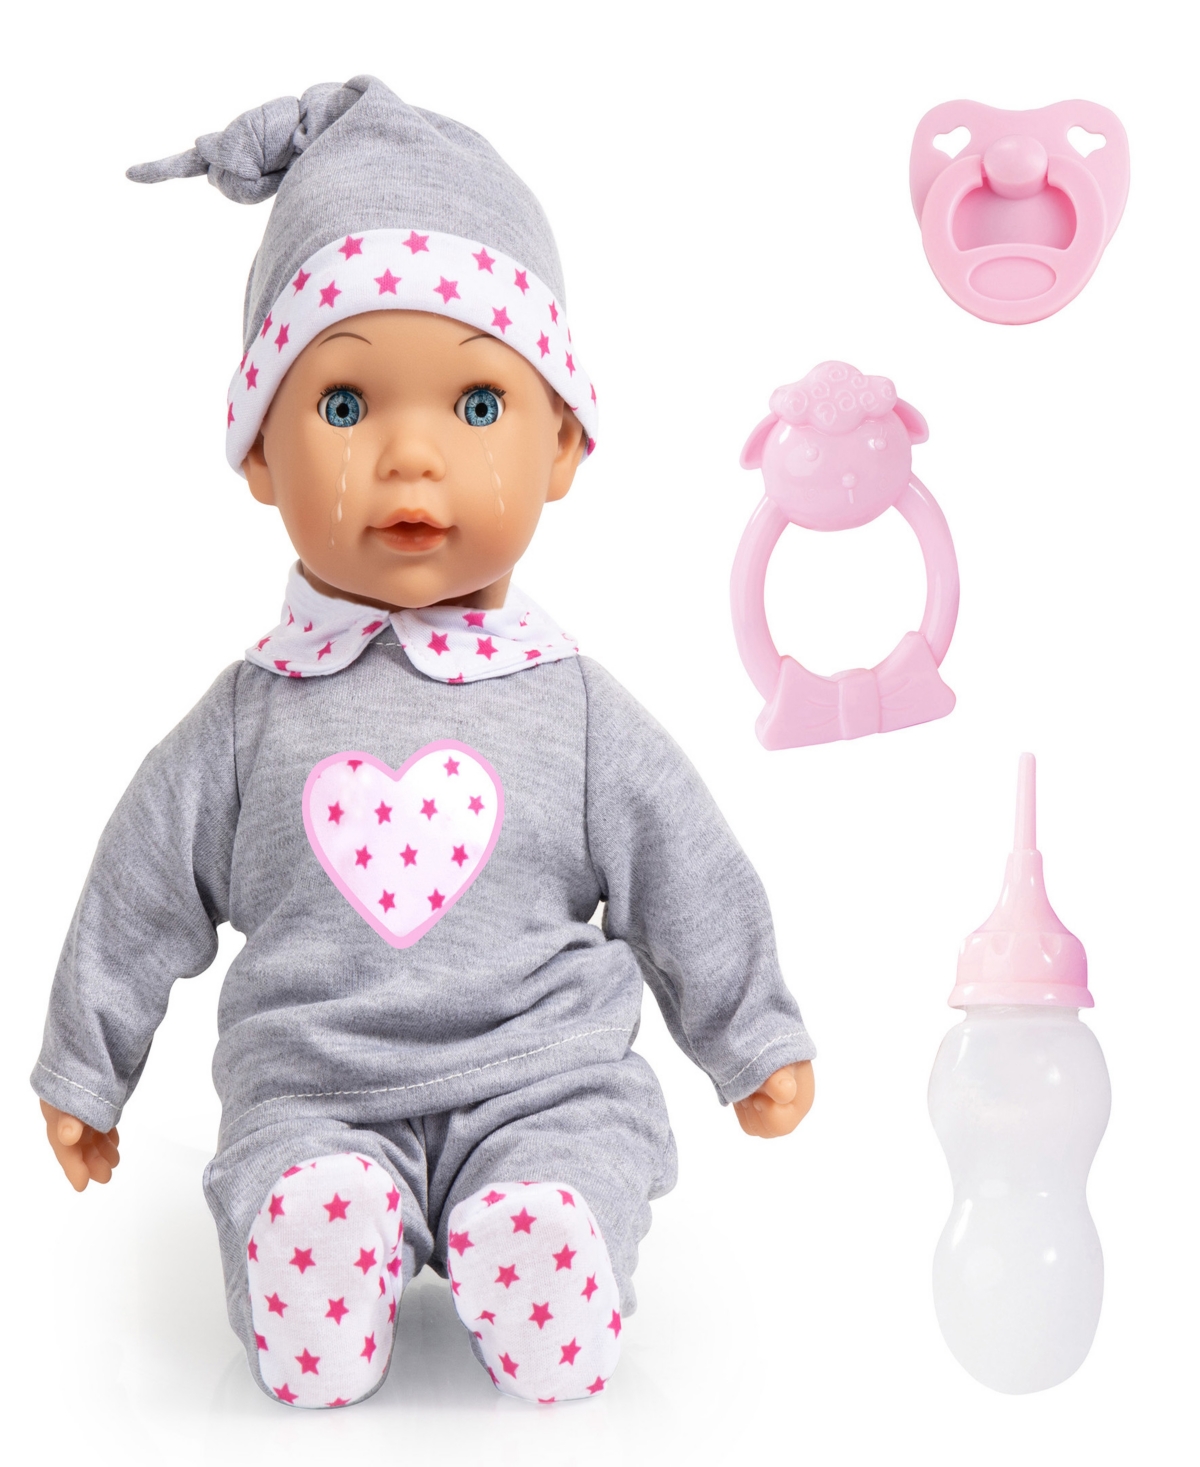 Bayer Design Doll Grey, Pink, Hearts, Interactive Tears Baby In Multi